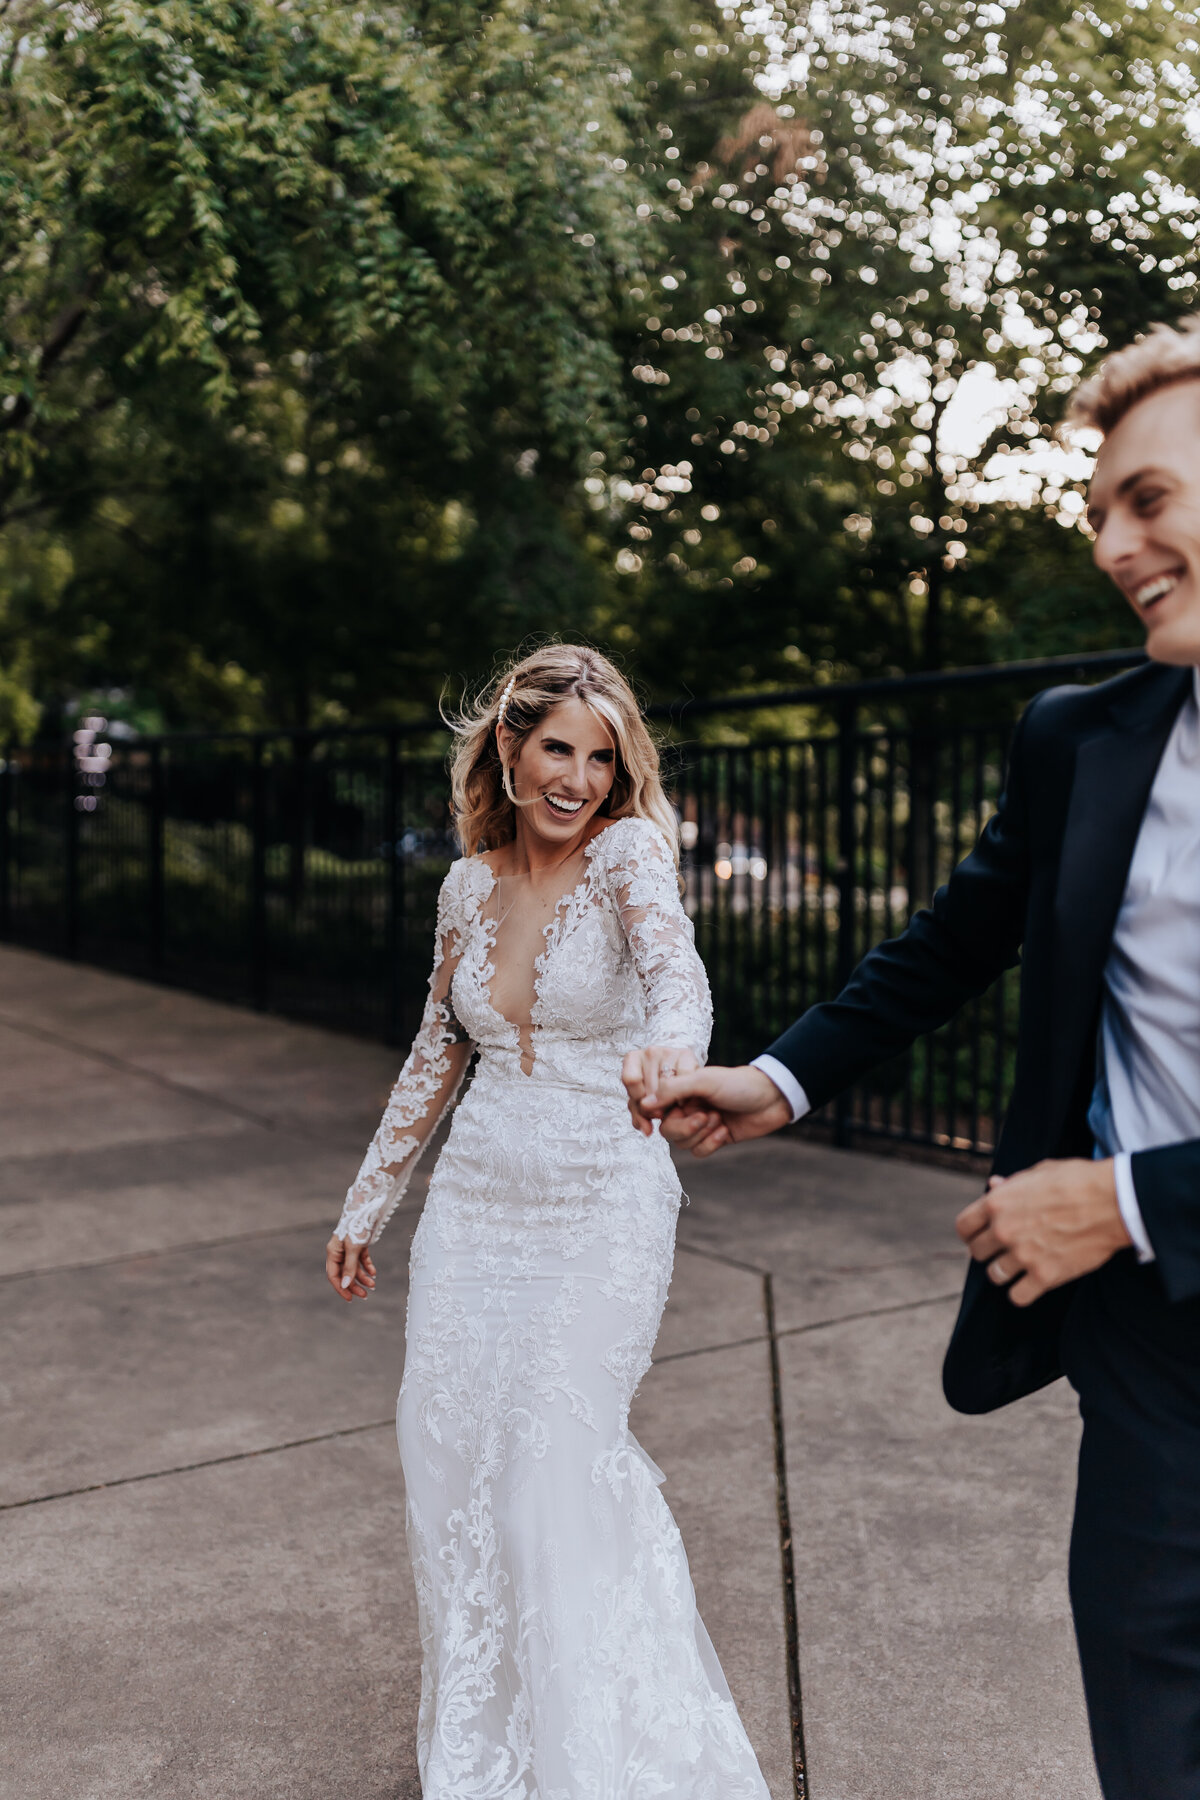 Nashville wedding photographer captures bride laughing with groom